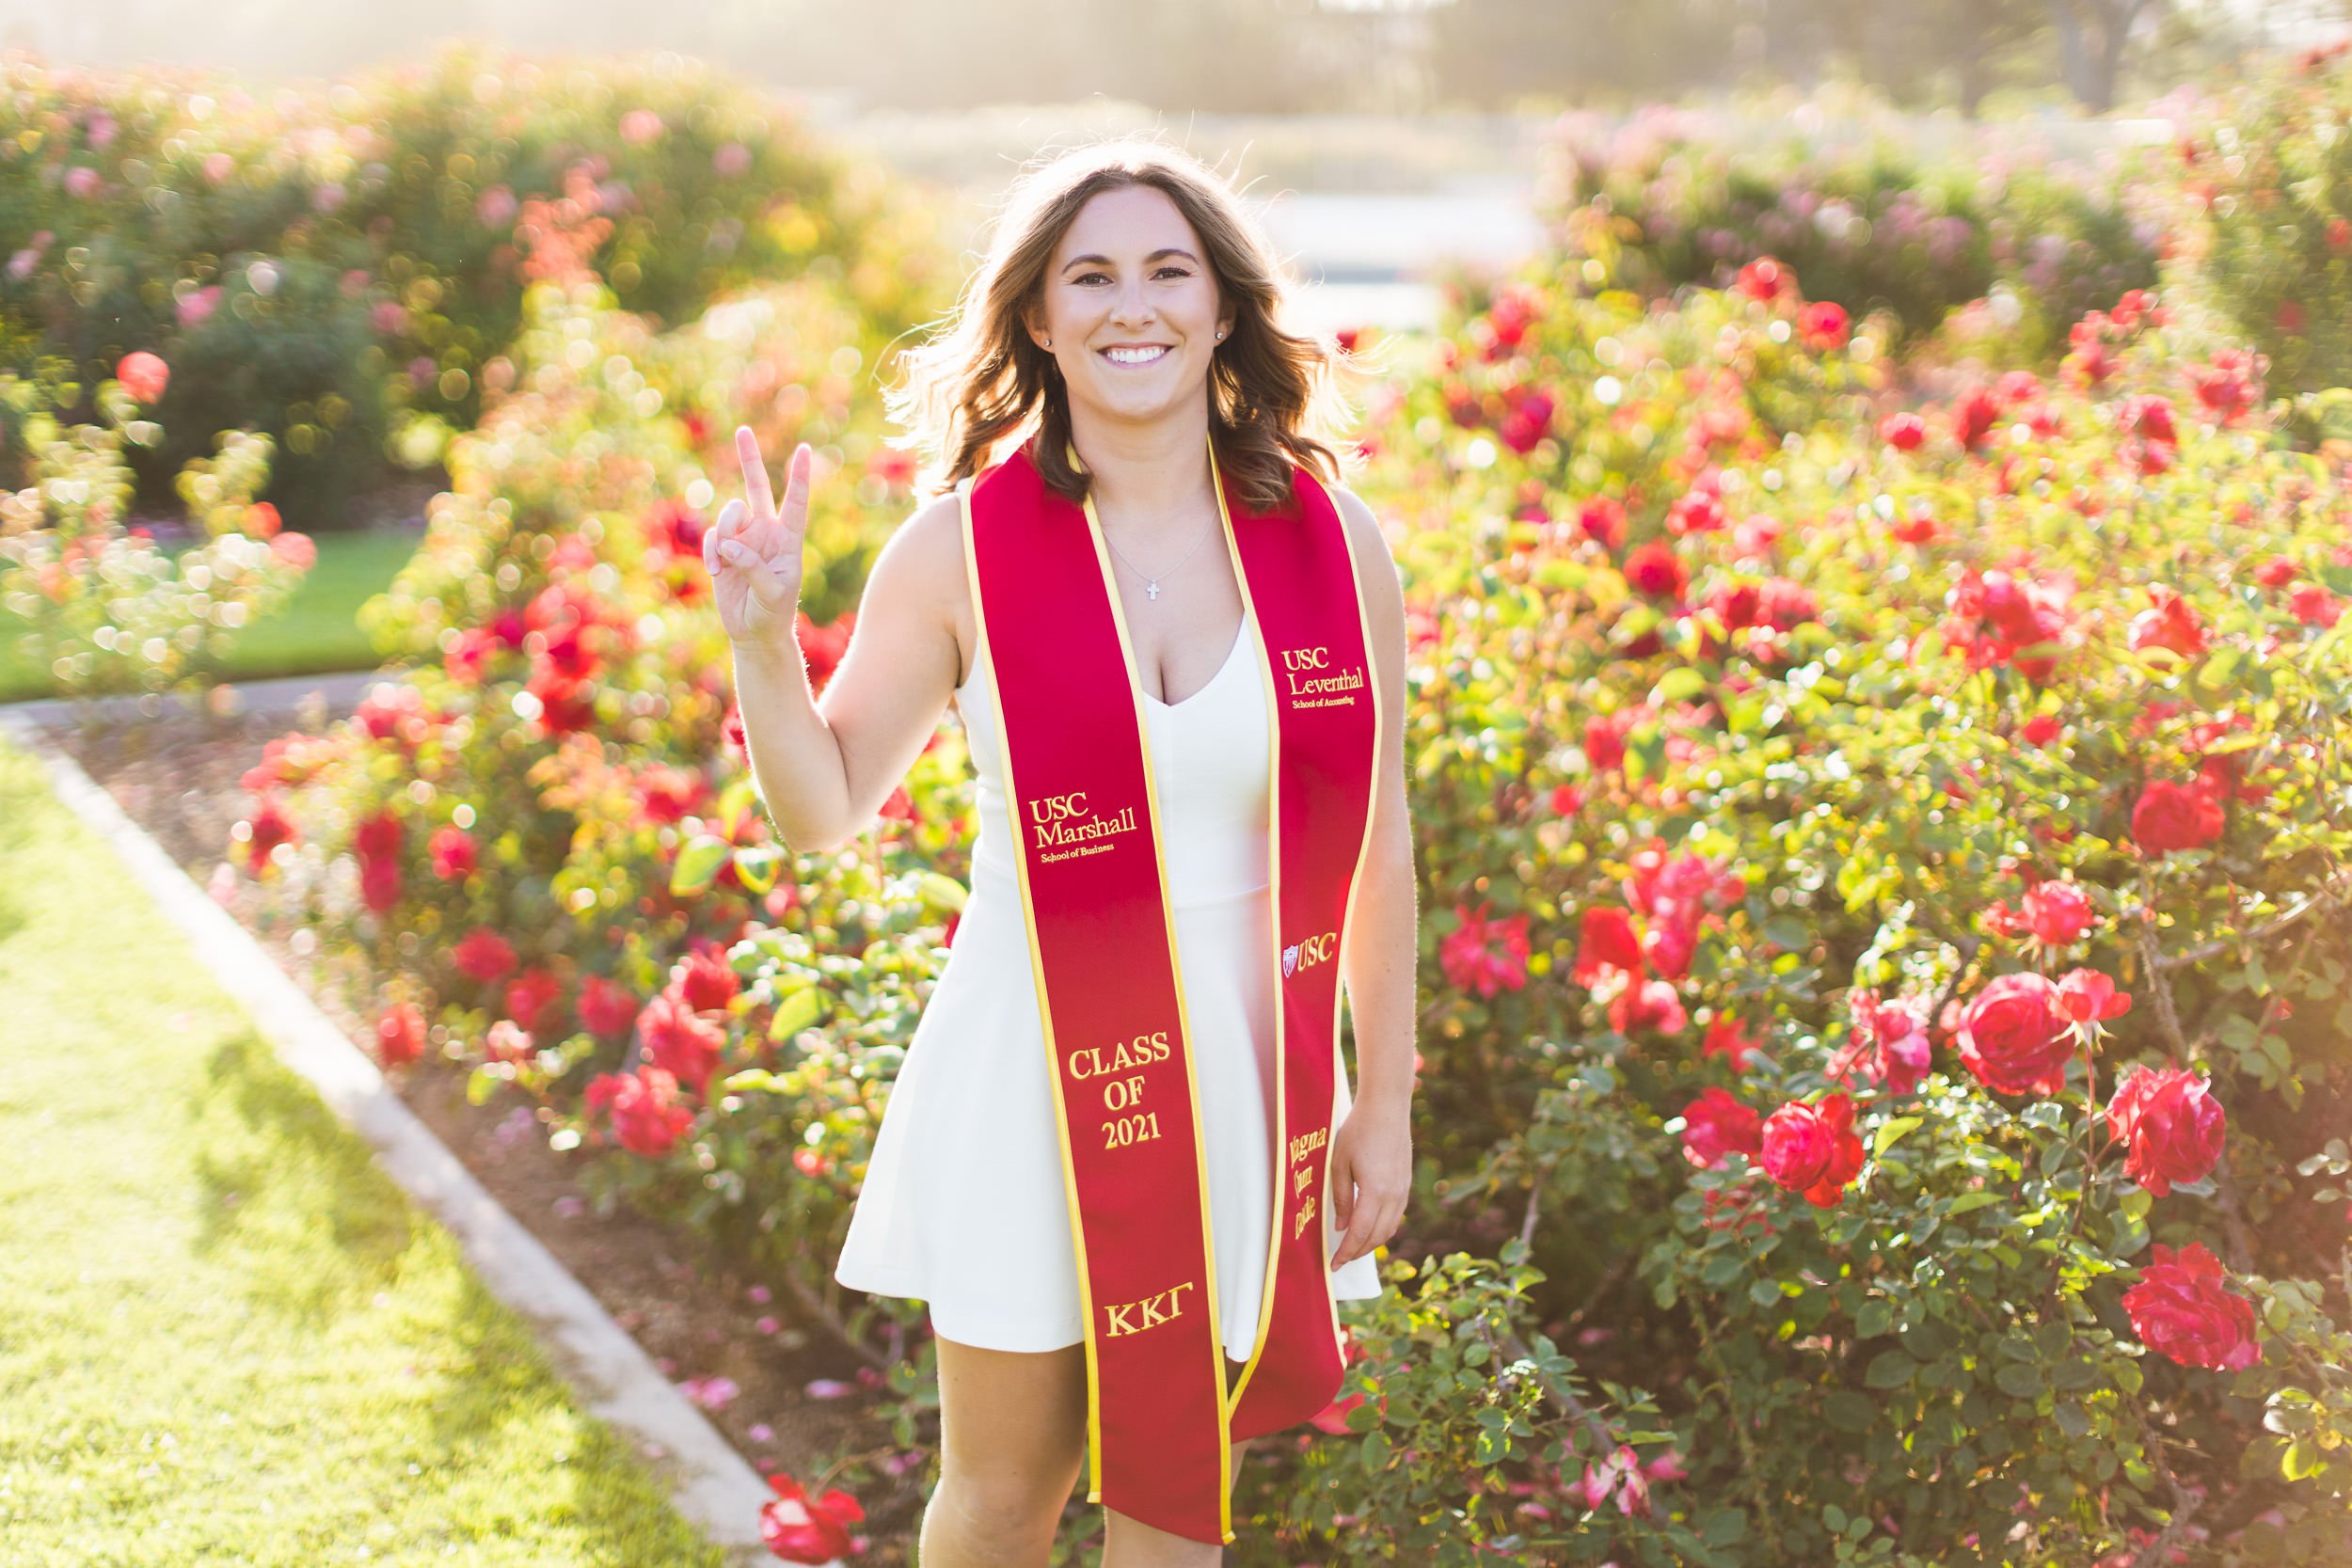 USC Rose Garden Graduation Portraits of graduate with sash giving Victory sign.